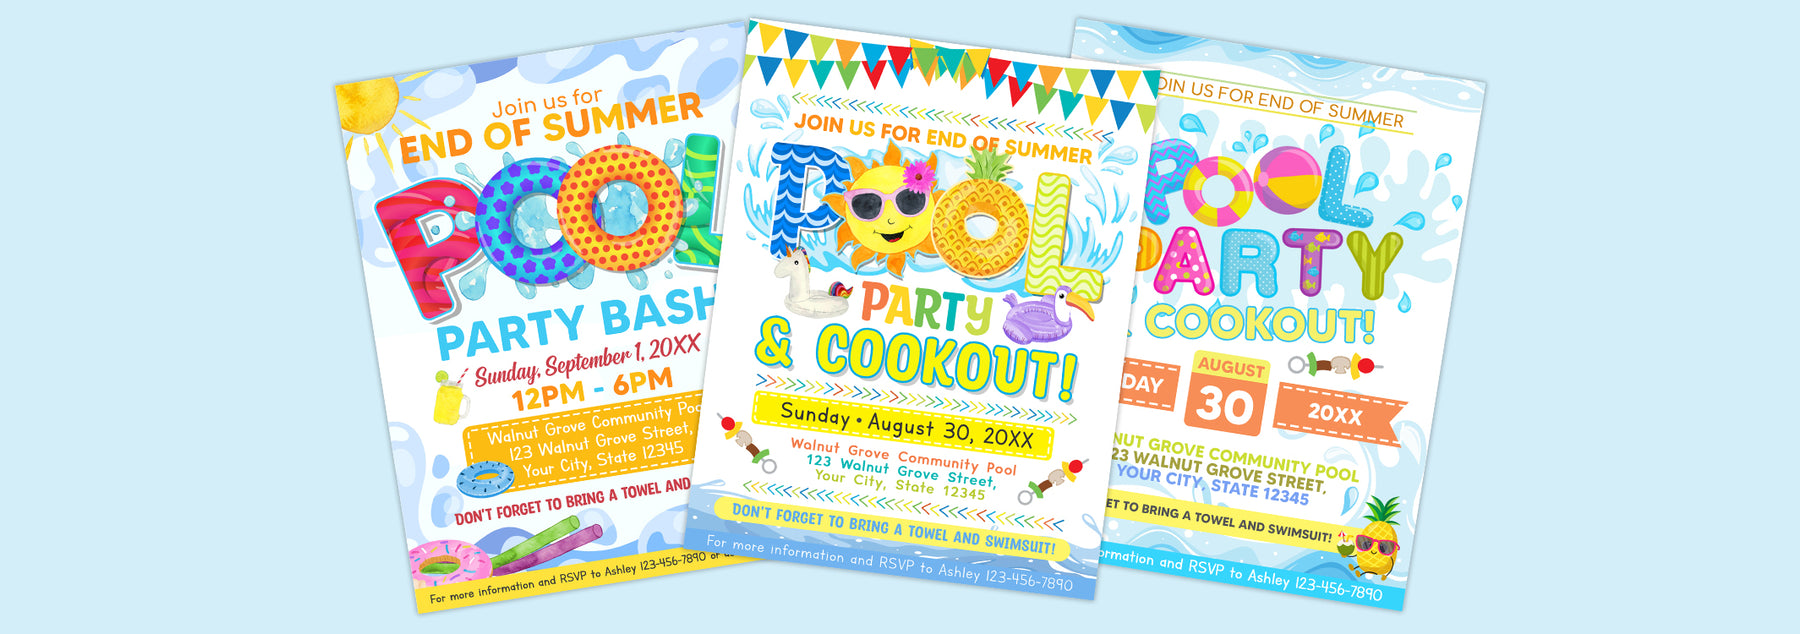 Pool Party Invitation Design Trends: What's Hot